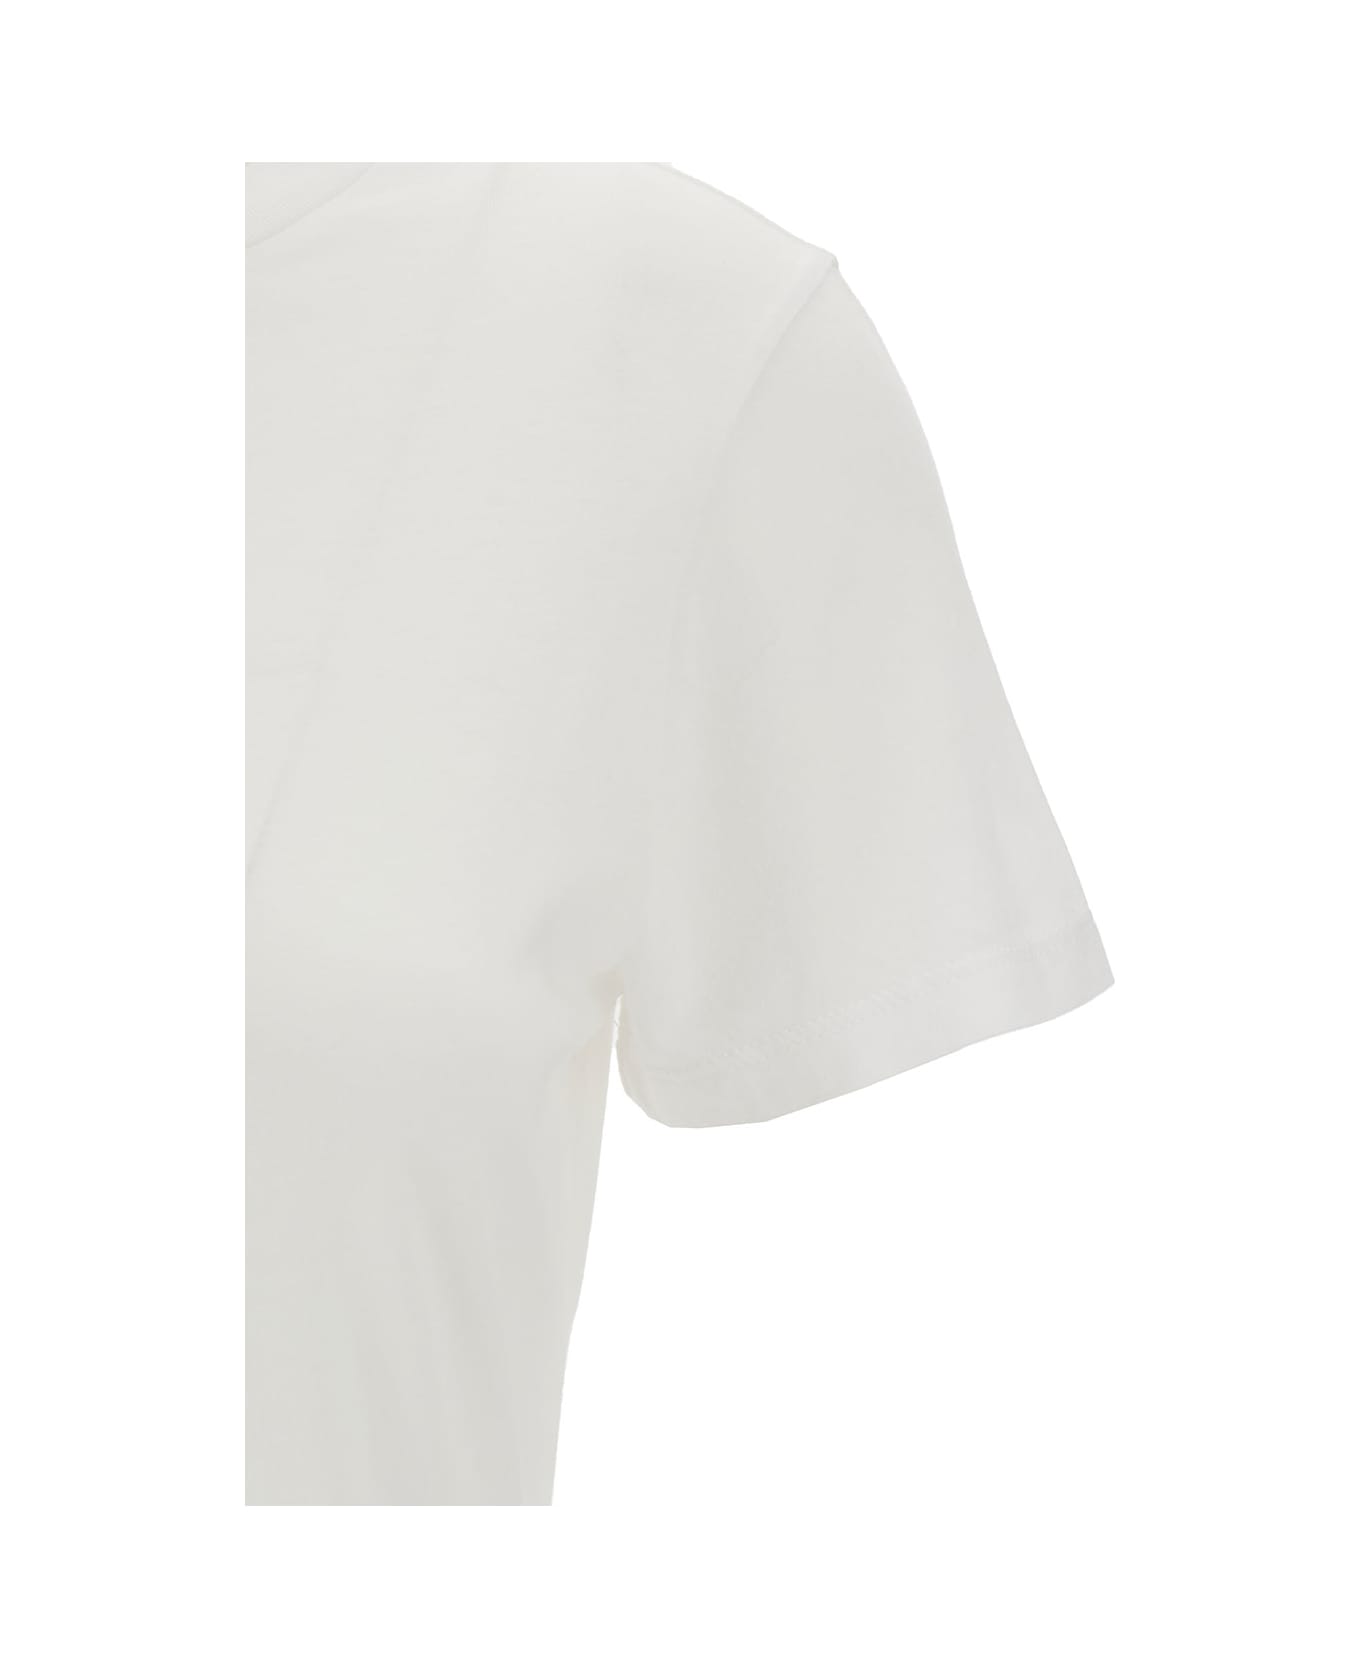 AGOLDE Annise - White Tシャツ